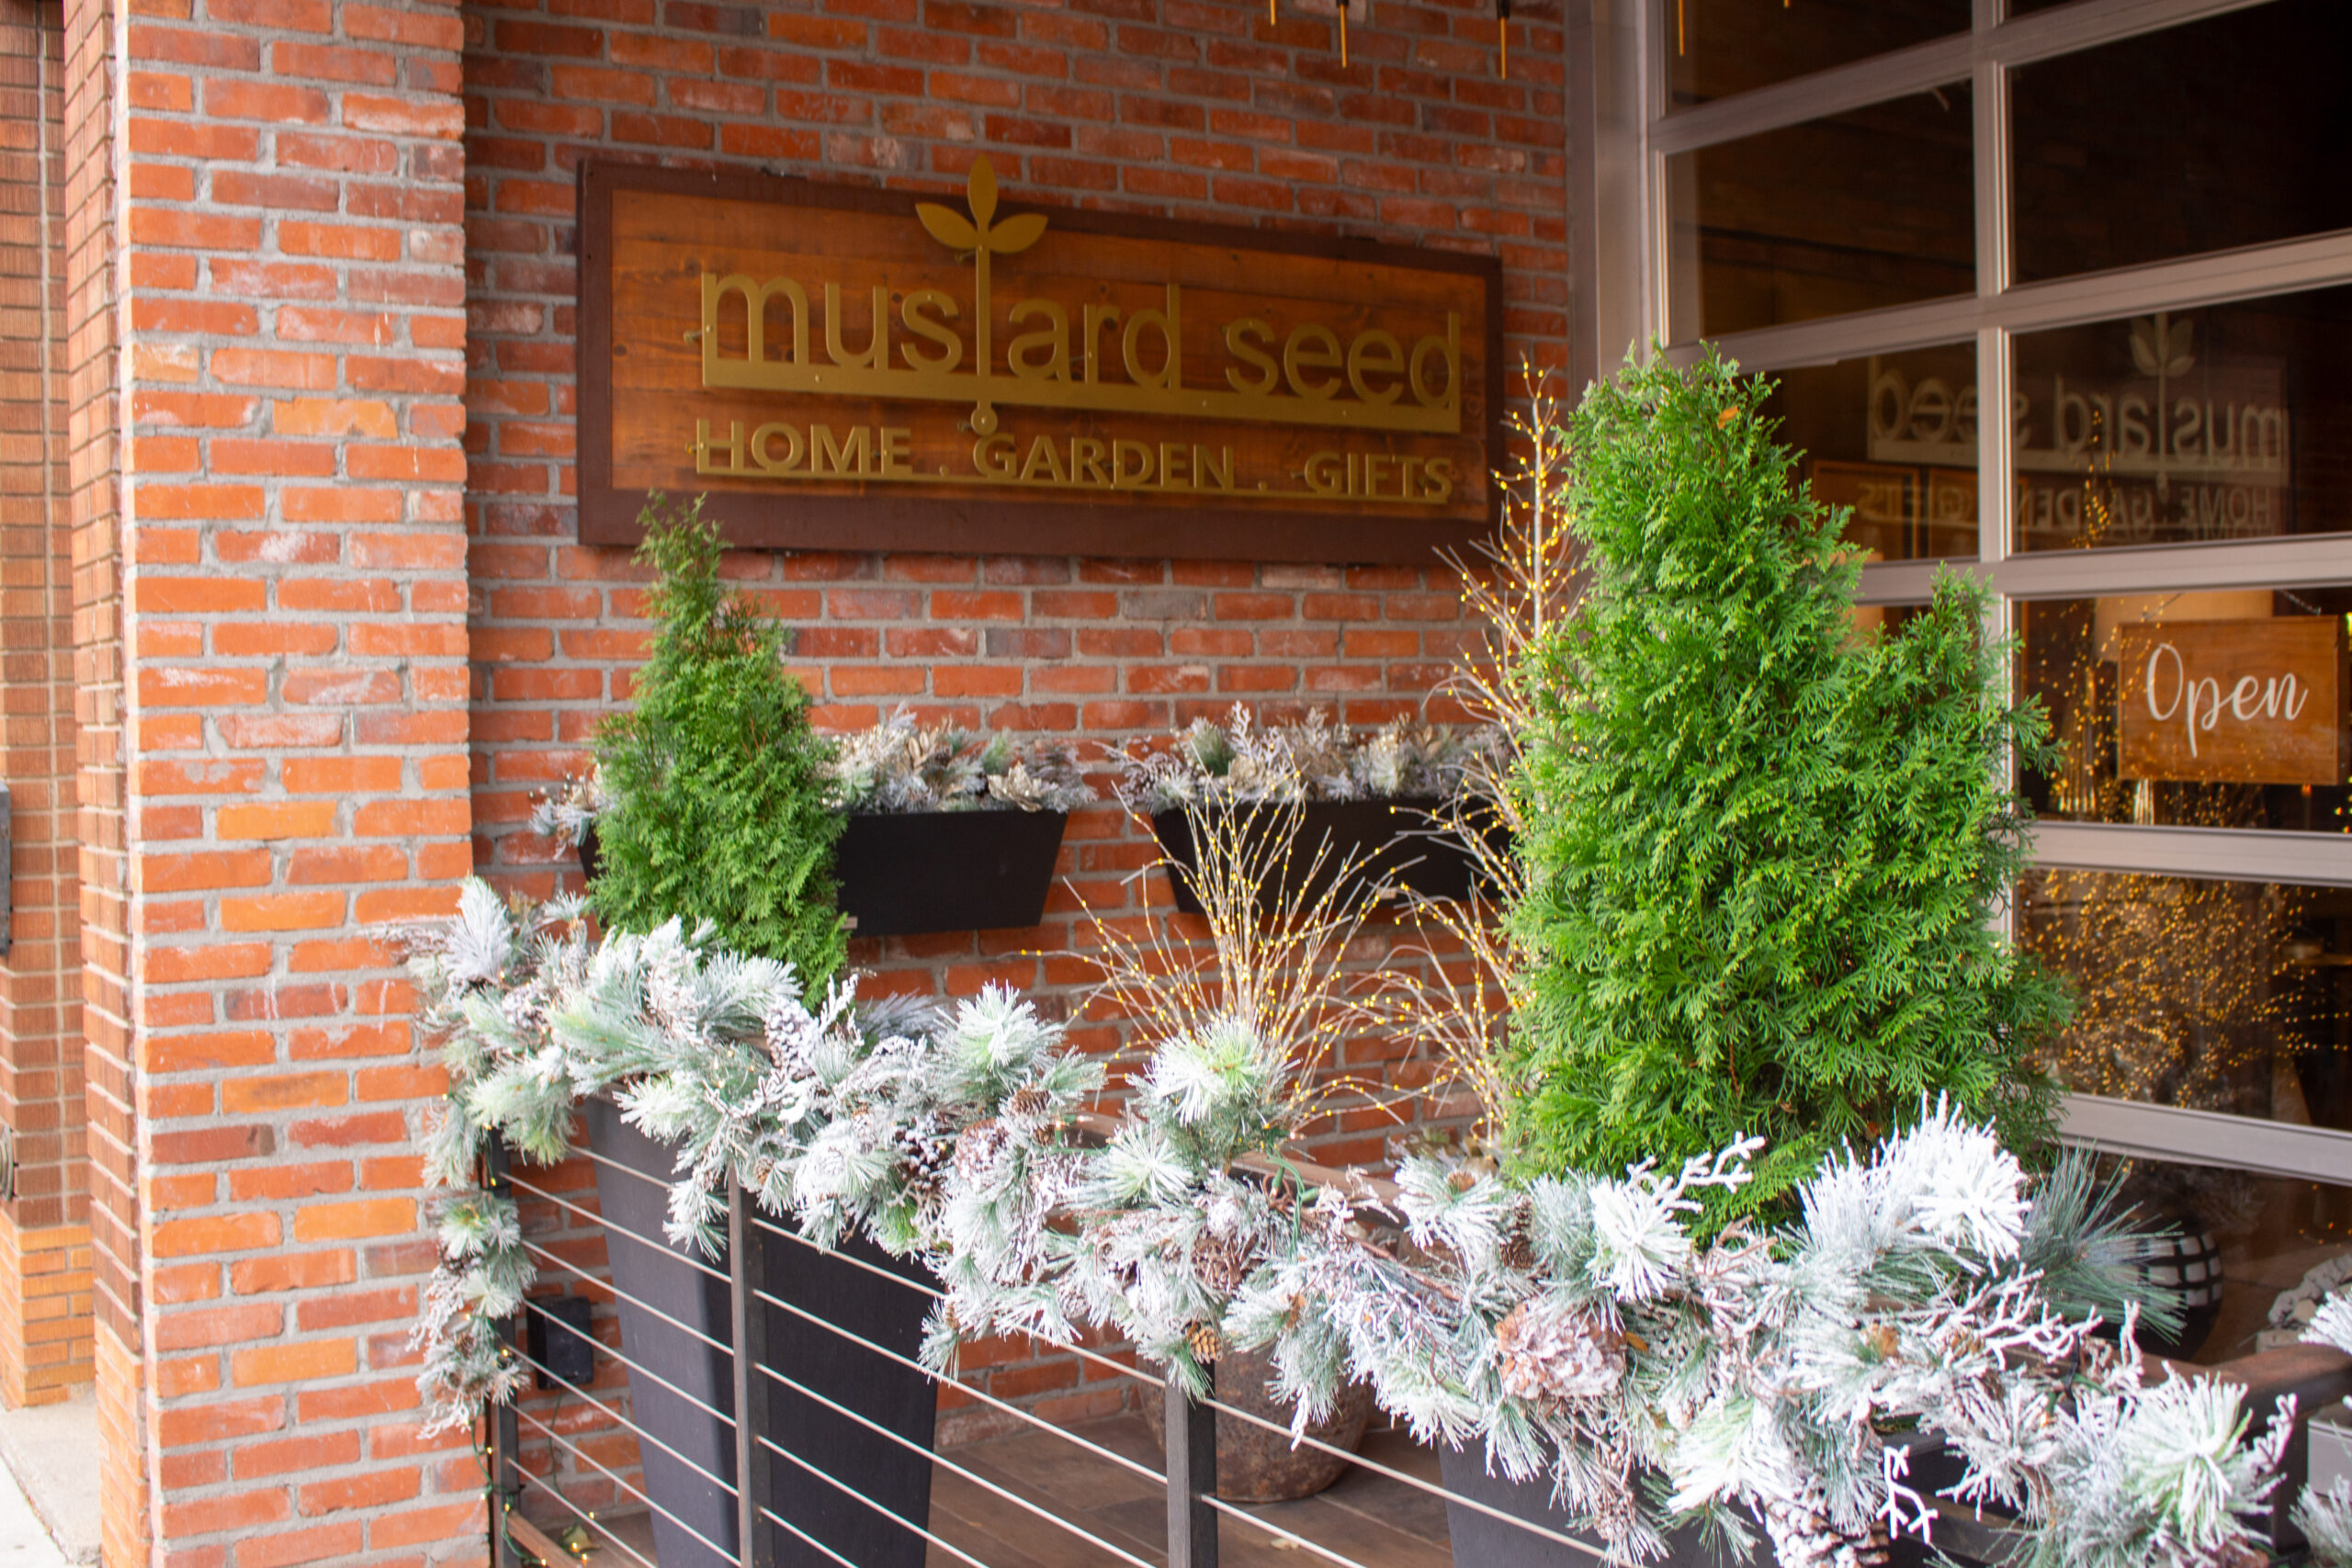 The Mustard Seed Home Gifts and Garden in Casper Wyoming decoration and home accents store